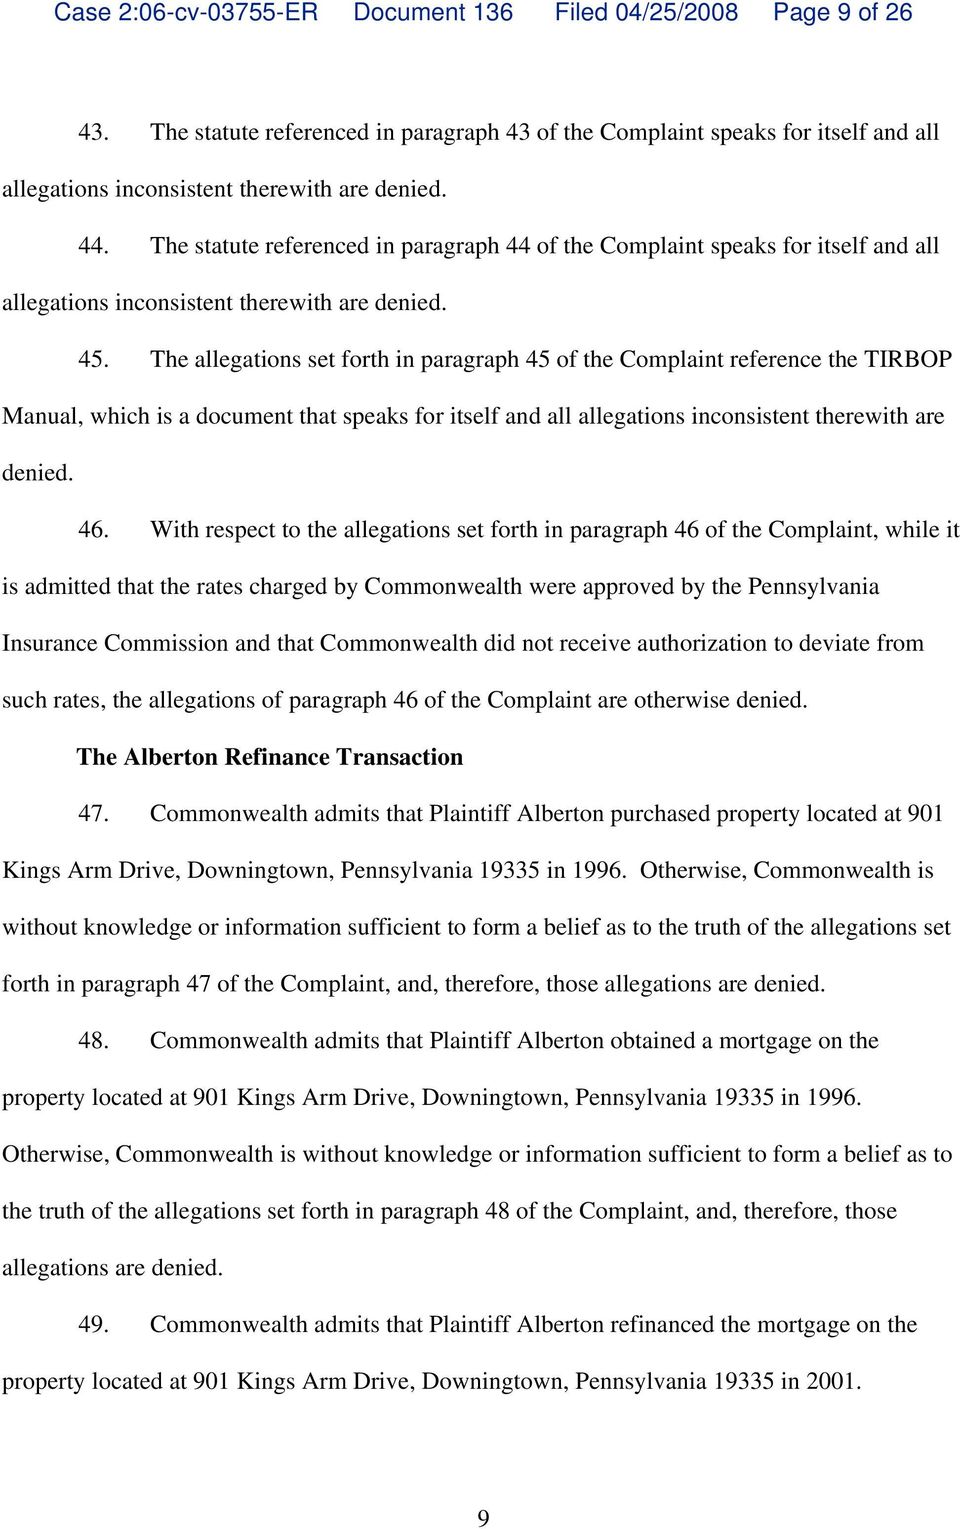 The allegations set forth in paragraph 45 of the Complaint reference the TIRBOP Manual, which is a document that speaks for itself and all allegations inconsistent therewith are 46.